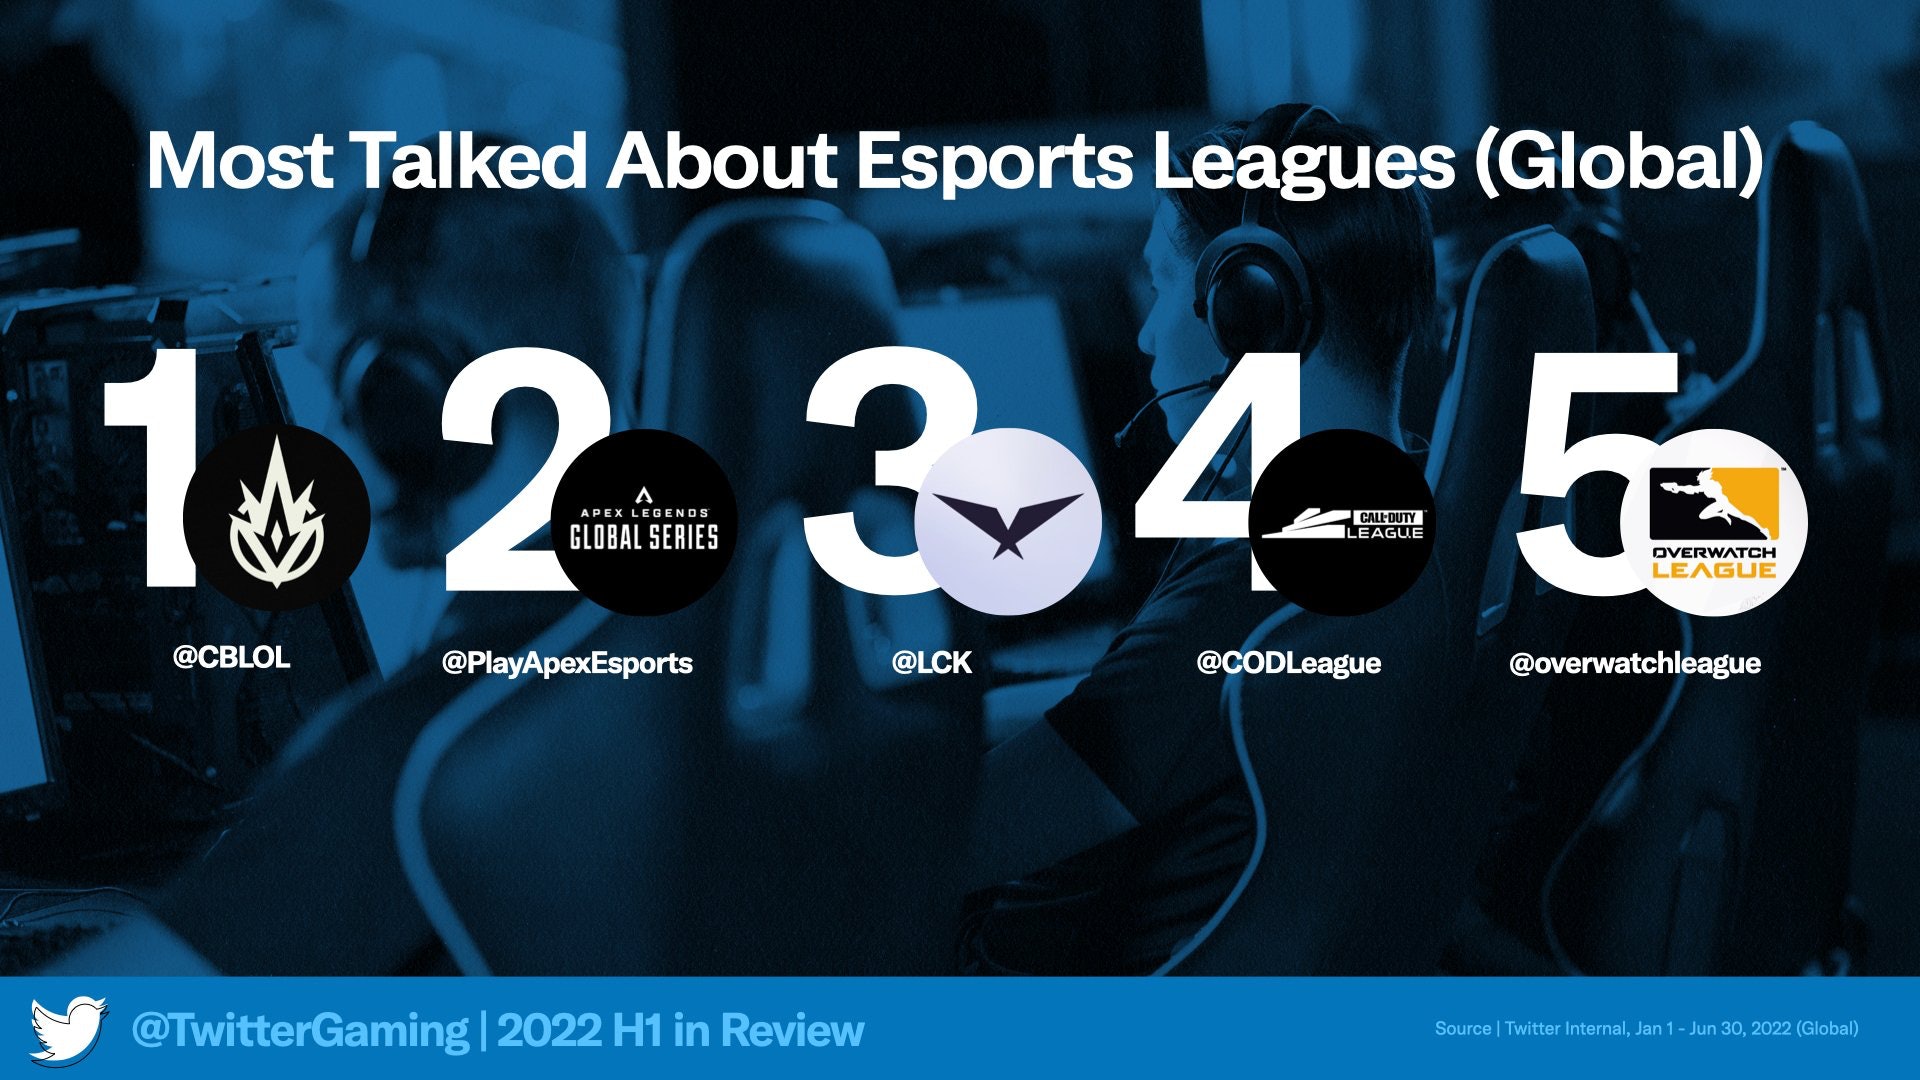 https://blog.twitter.com/en_us/topics/insights/2022/twitter-gaming-reports-record-conversation-volume-for-first-half-of-2022